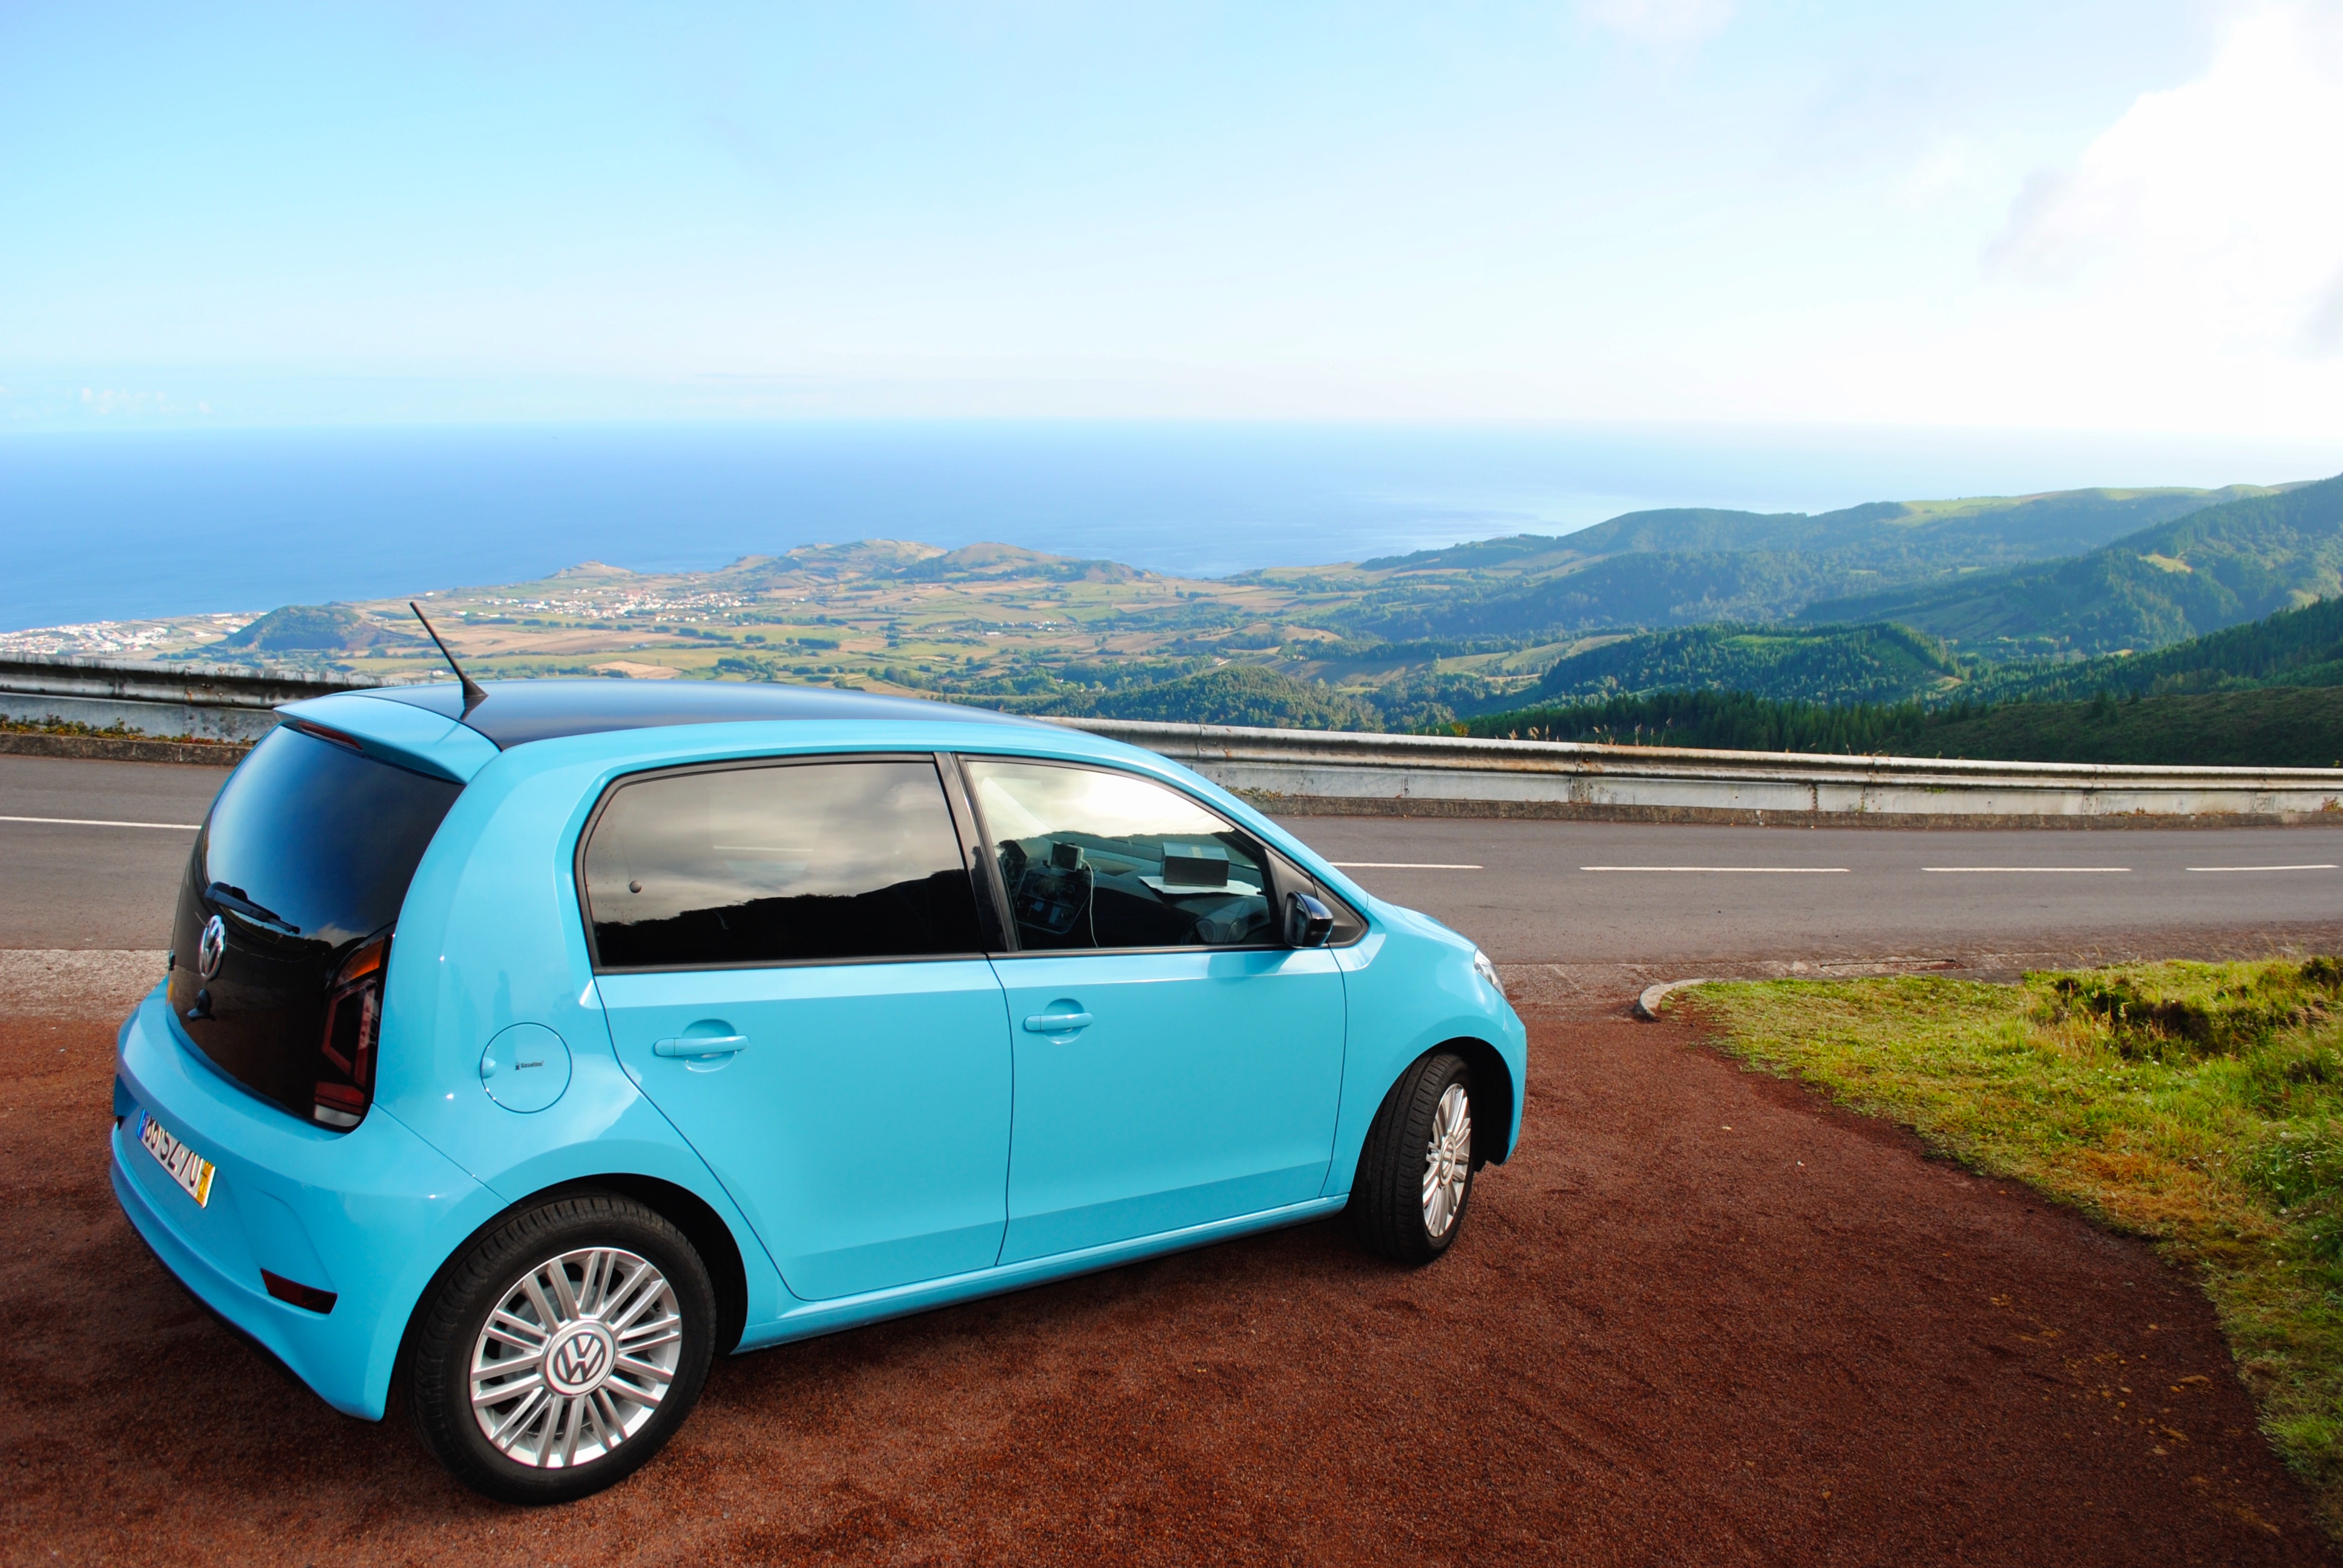 Rent a car in the Azores